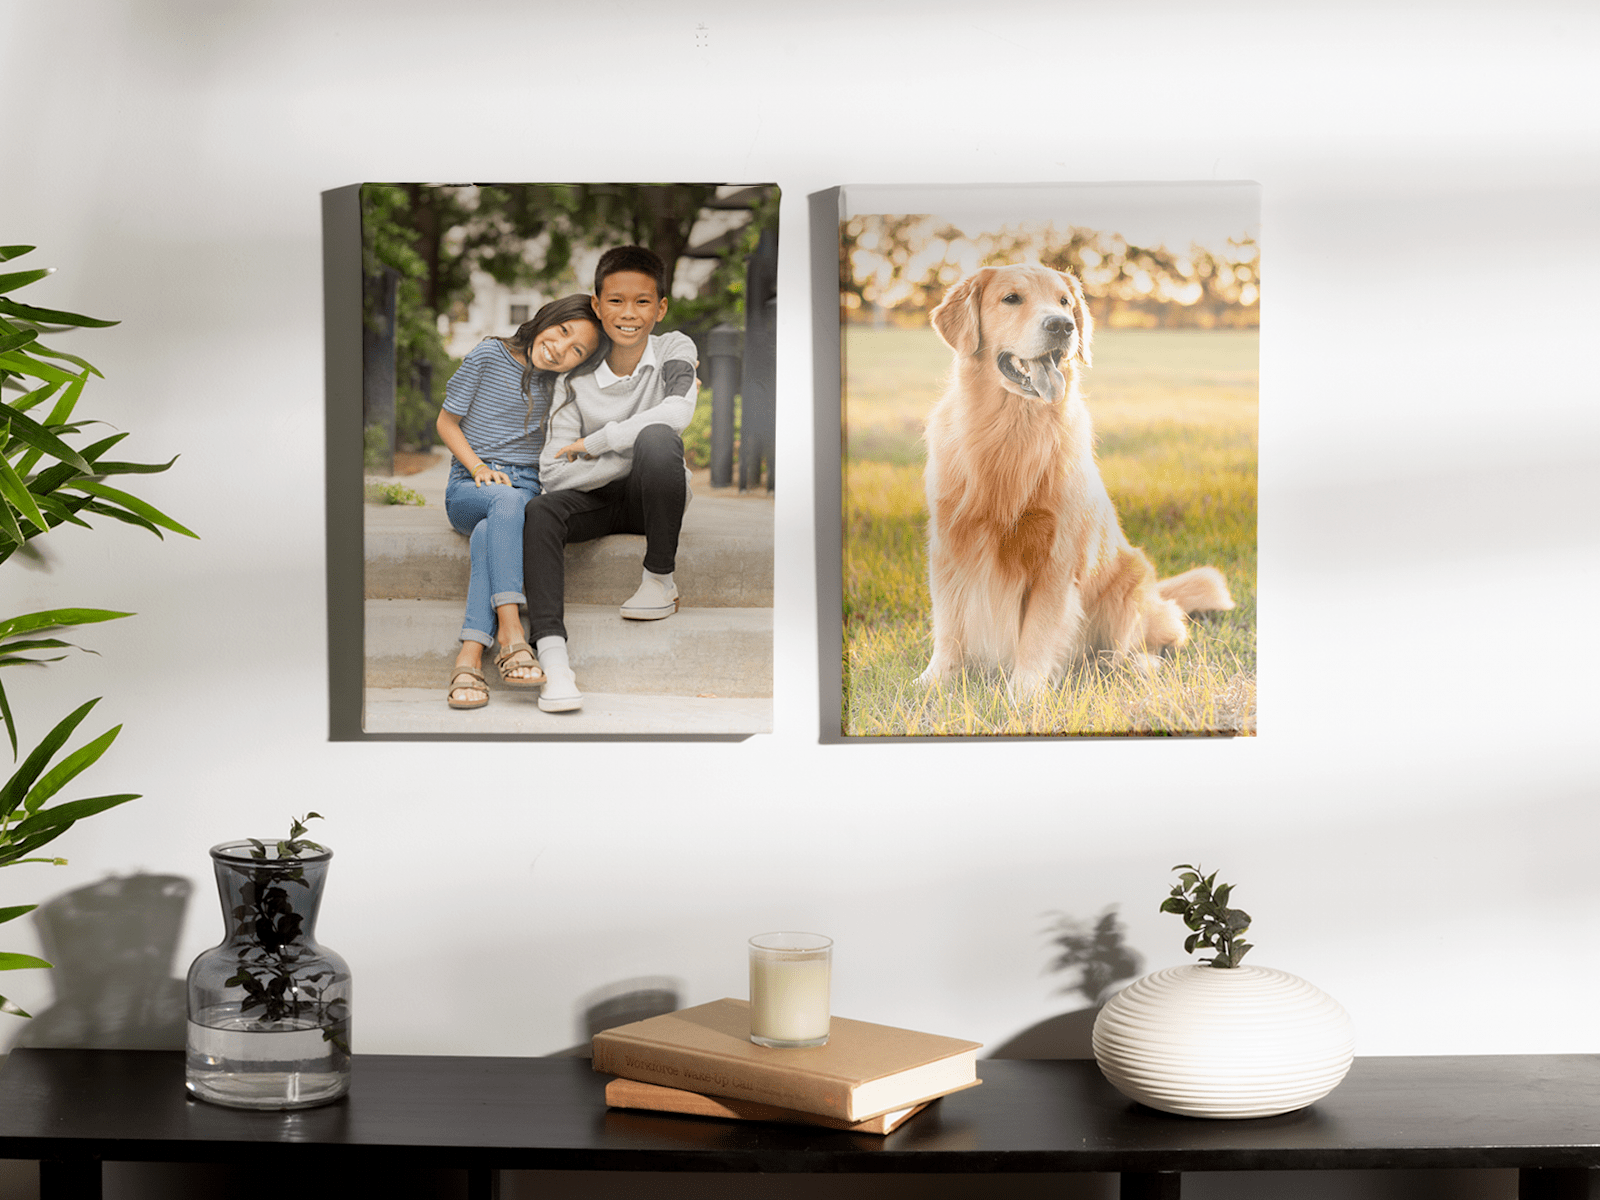 Canvas prints: customized photo prints in Canada